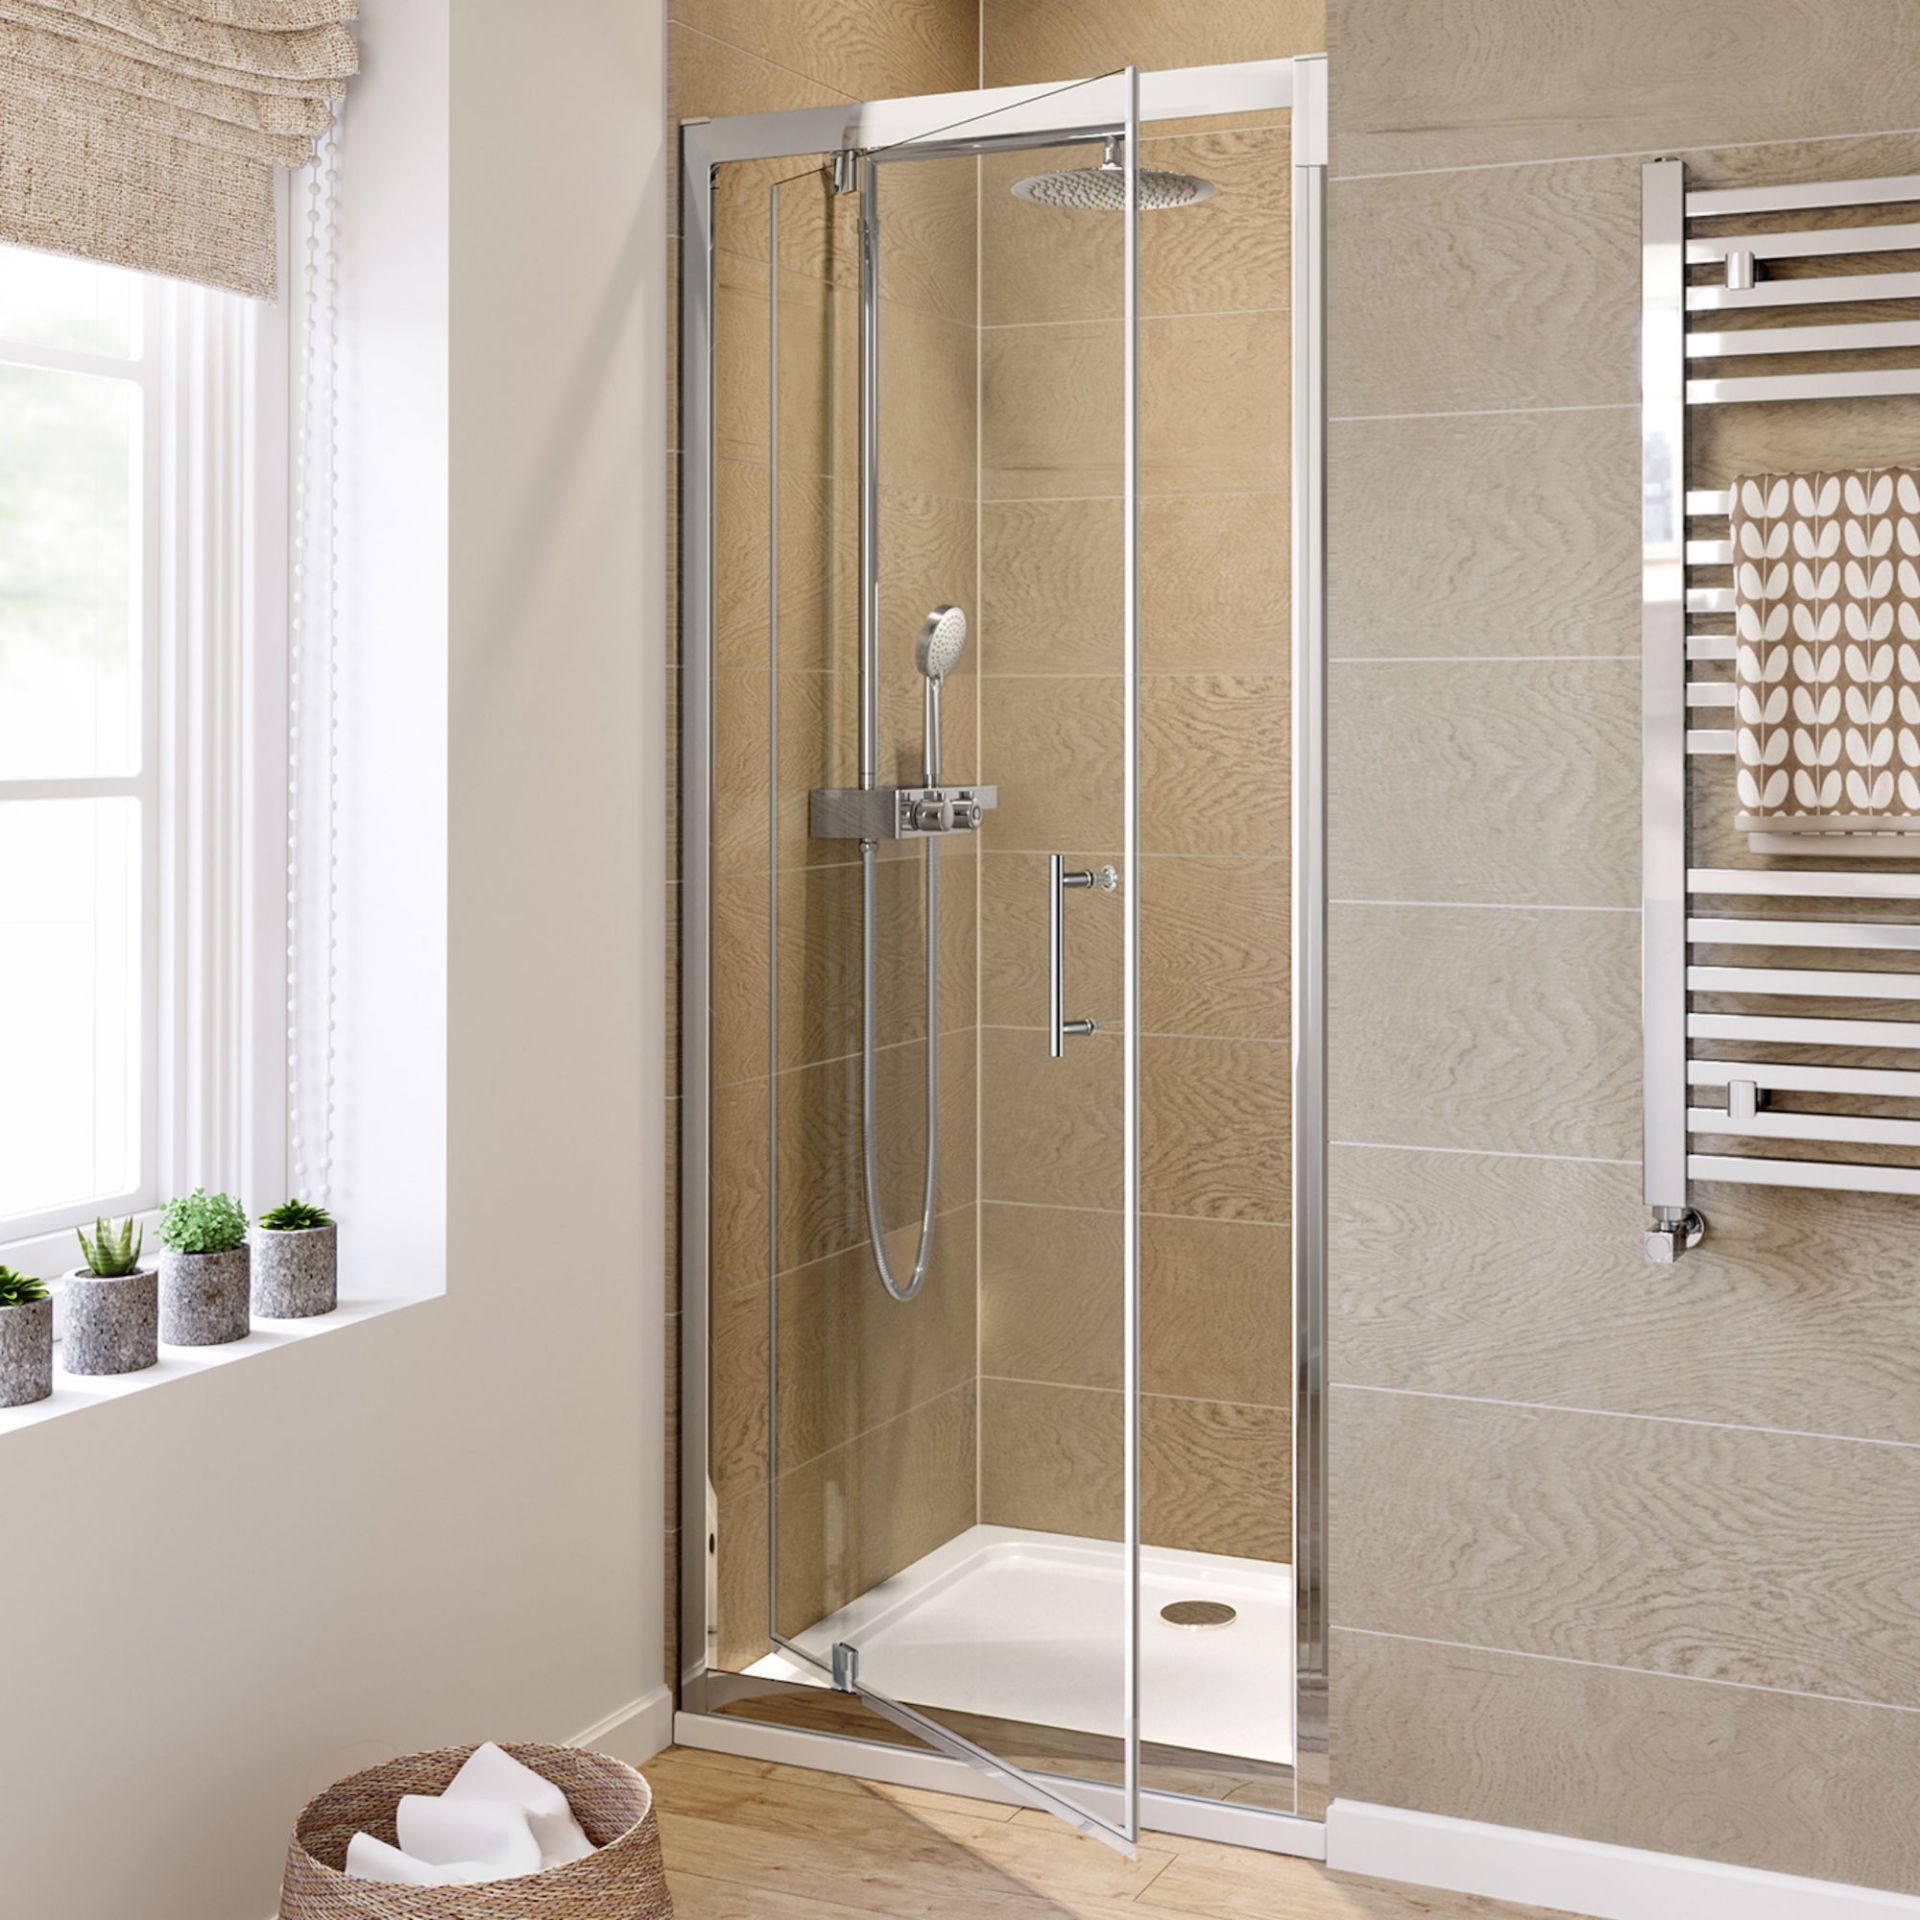 New (W128) 6mm - Elements Pivot 760mm Shower Door. 6mm Safety Glass Fully Waterproof Tested. ...